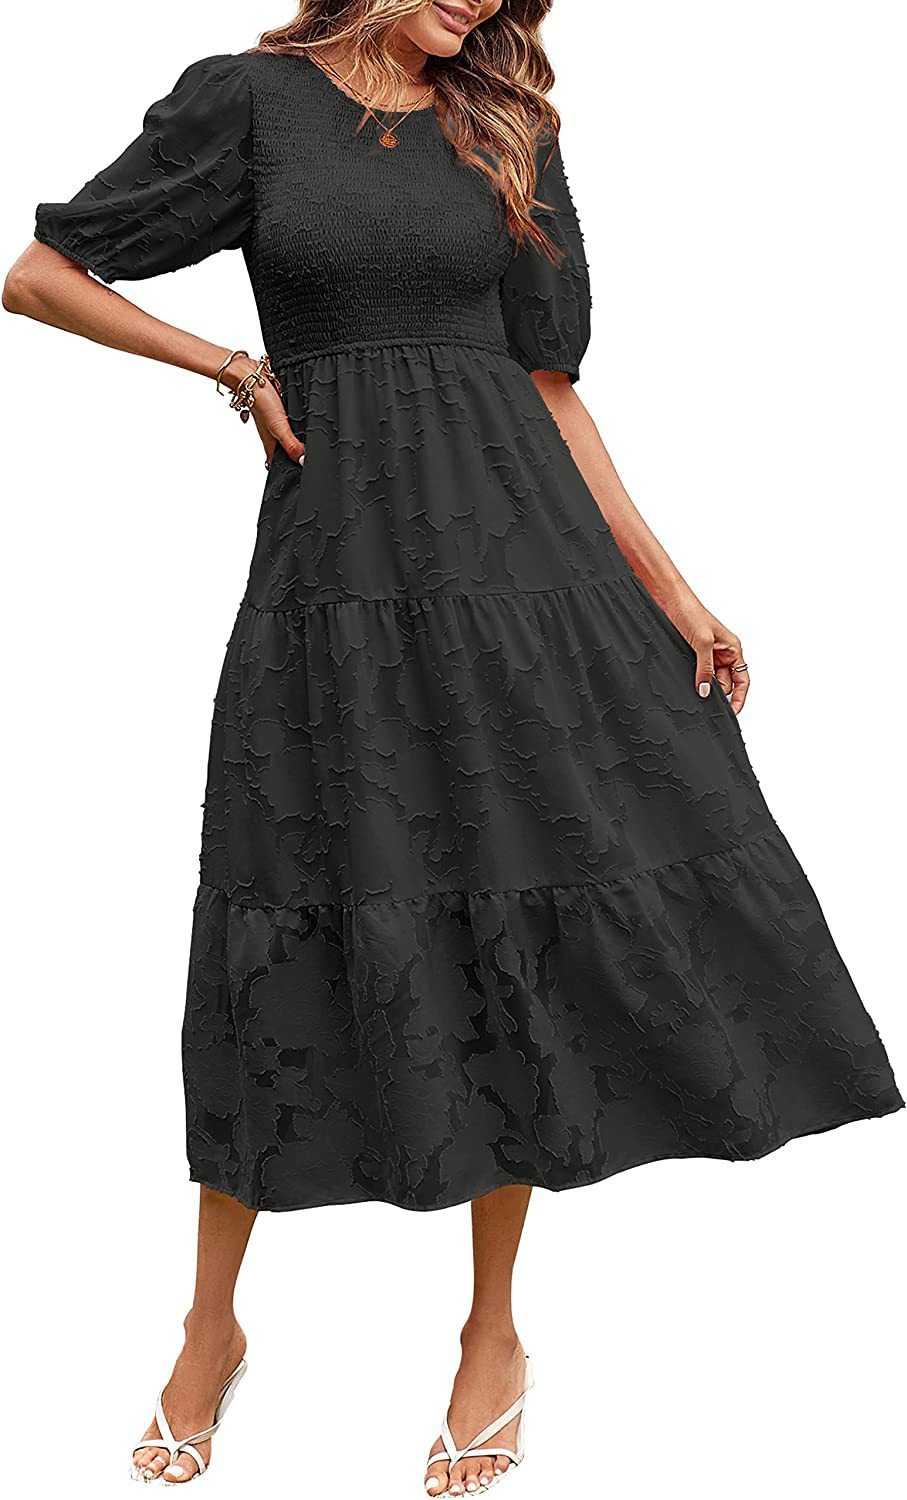 Pleated Puff Sleeve Layered Floral Dress